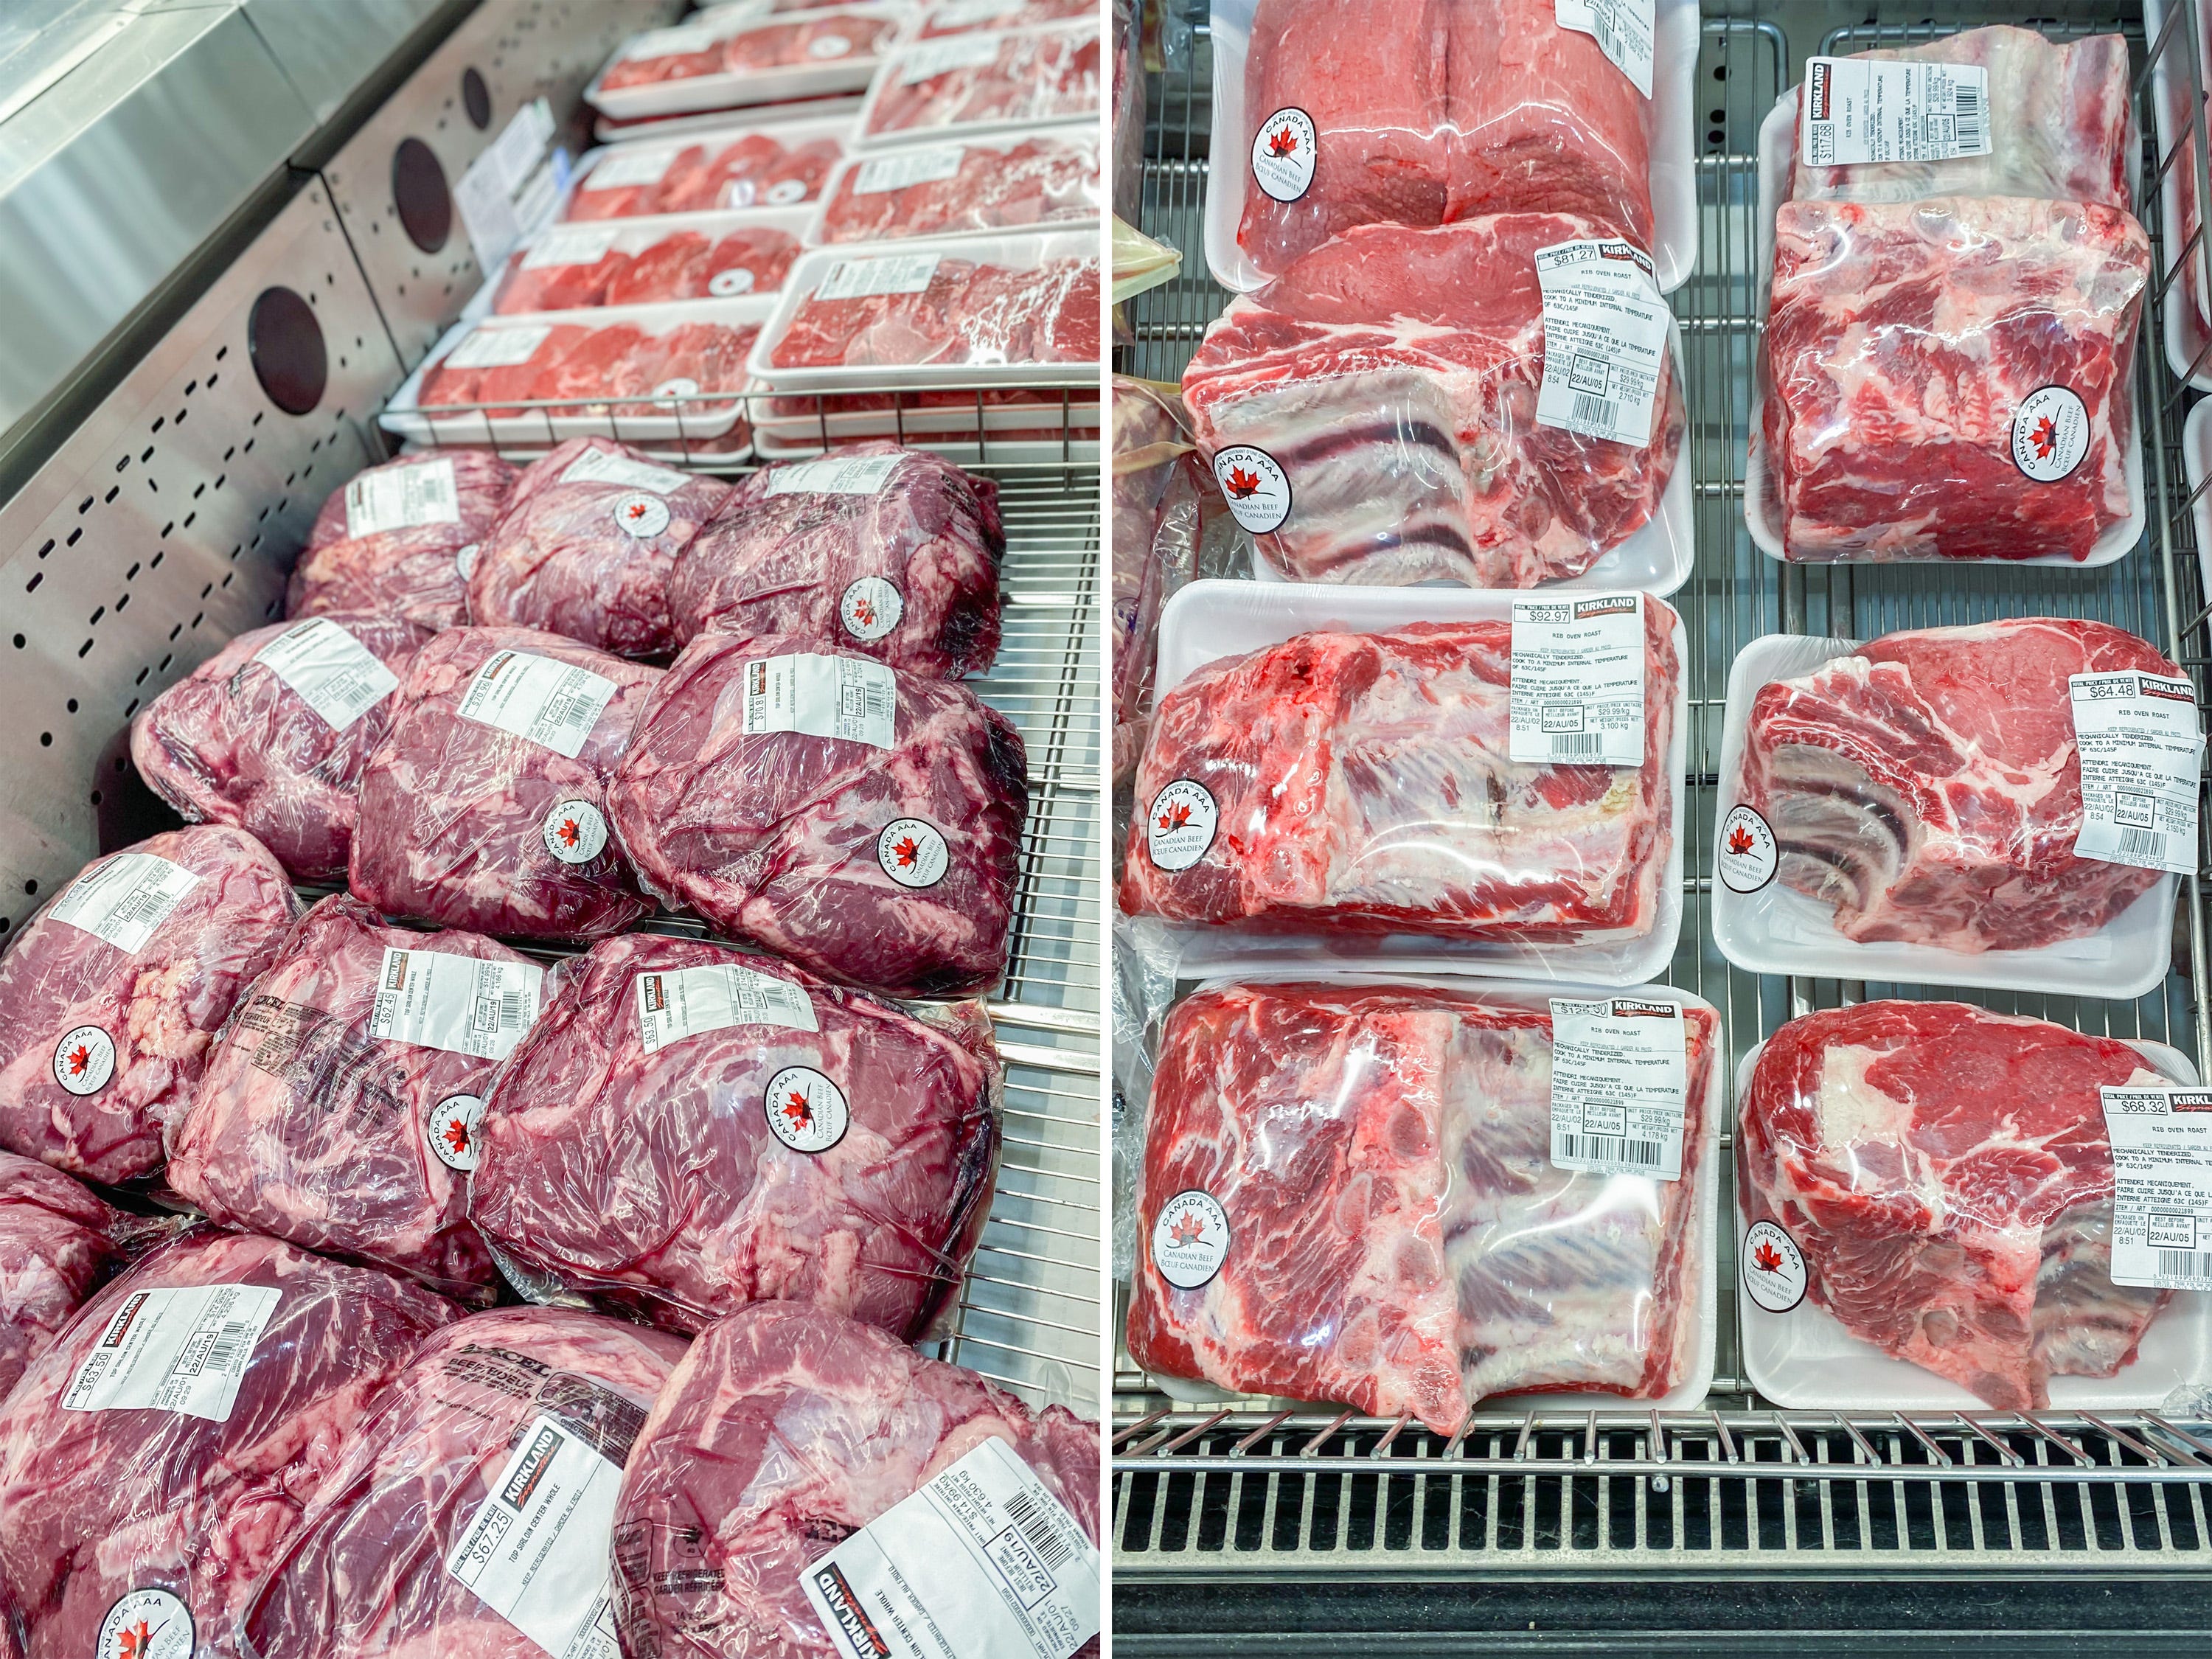 <p>From bison burgers to Wagyu beef, <a href="https://www.costco.ca/meat.html" rel="nofollow noopener sponsored">Costco stores in Canada</a> have a wide variety of locally sourced meats.</p><p>The US has a variety of locally sourced meat and seafood as well, <a href="https://www.costco.com/meat.html" rel="nofollow noopener sponsored">f</a><a href="https://www.costco.com/meat.html" rel="nofollow noopener sponsored">rom Chicago steaks to bone-in pork cutlets</a>.</p>